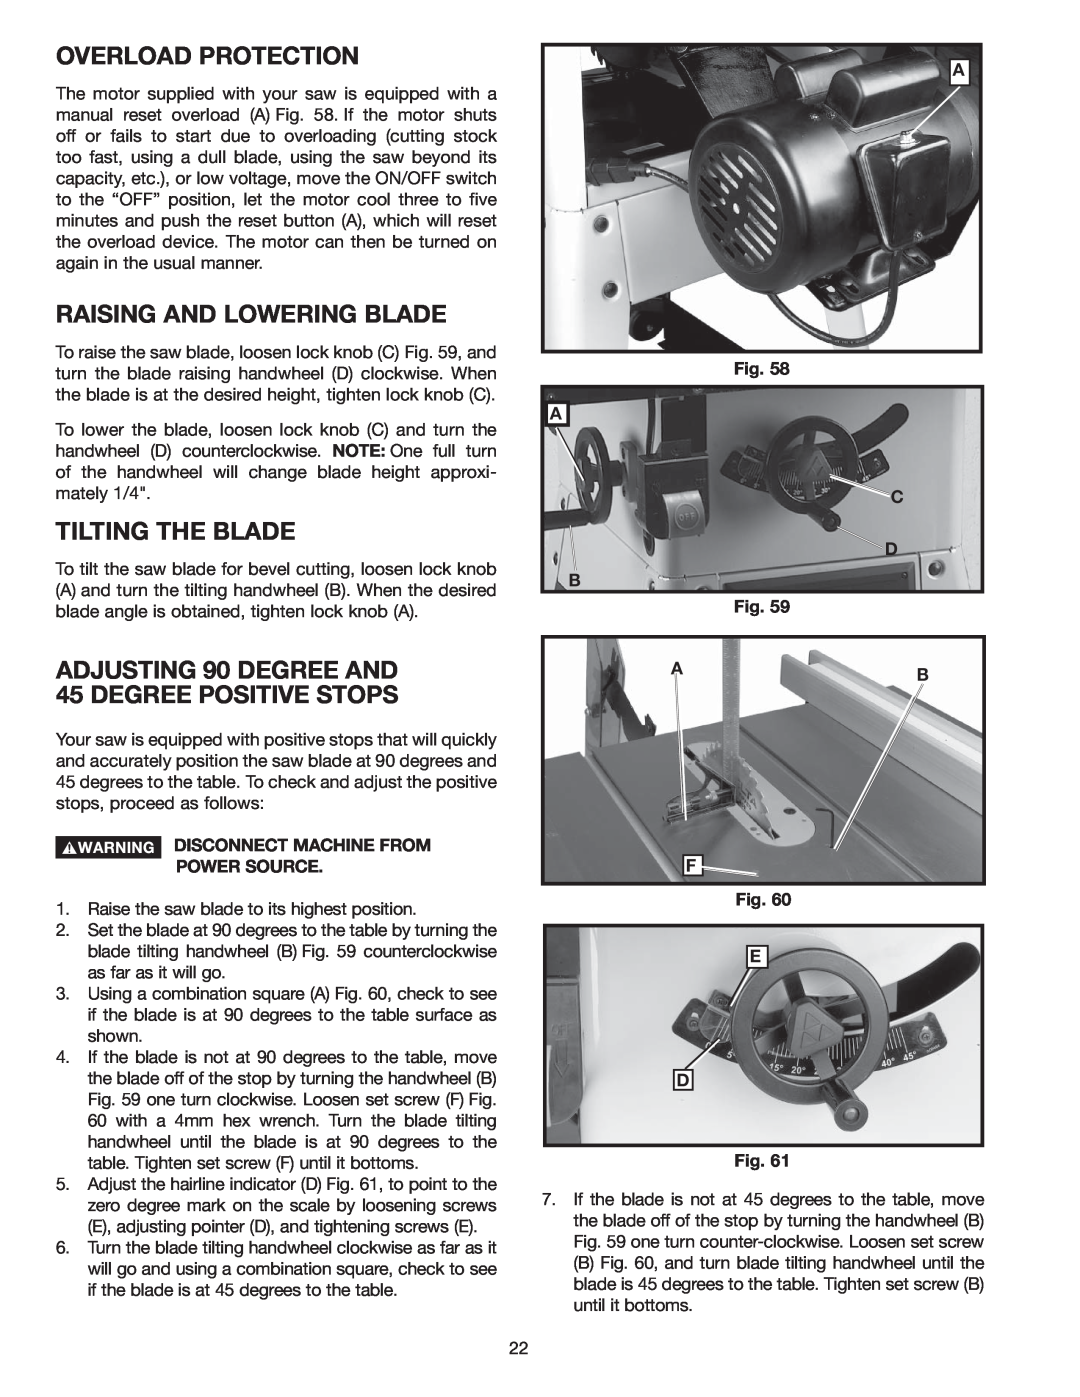 Delta 36-978 instruction manual Overload Protection, Raising And Lowering Blade, Tilting The Blade 